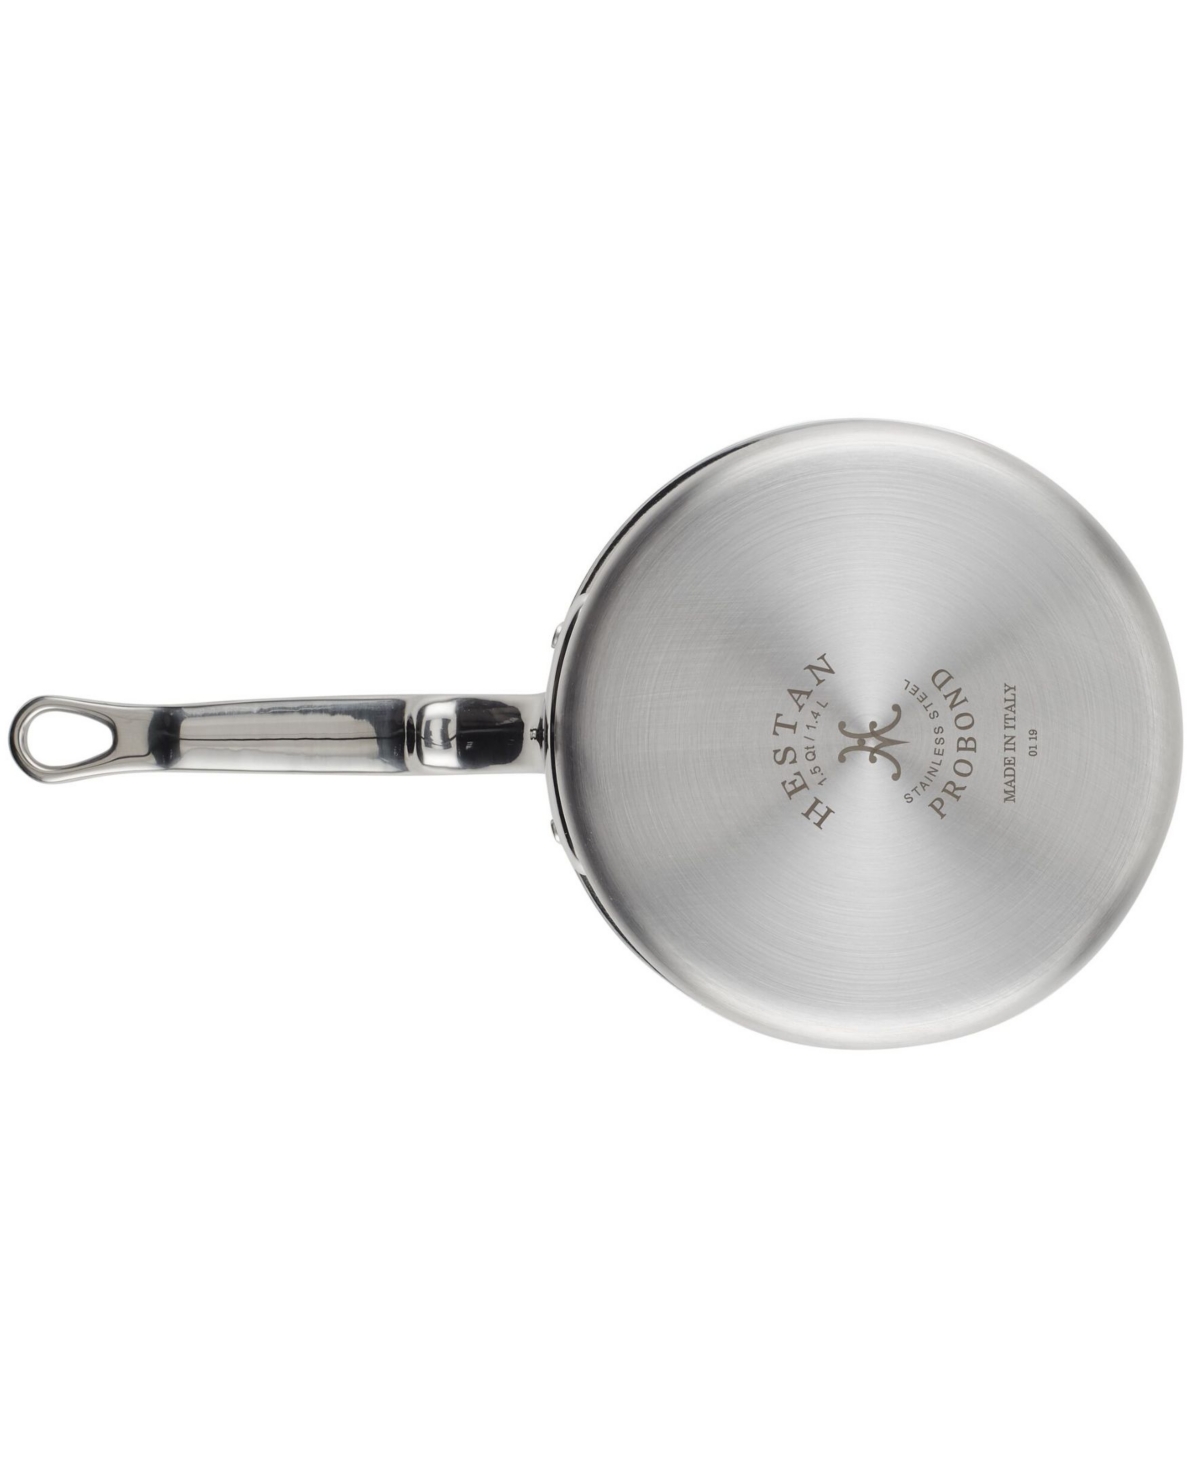 Shop Hestan Probond Clad Stainless Steel 1.5-quart Covered Saucepan In Silver